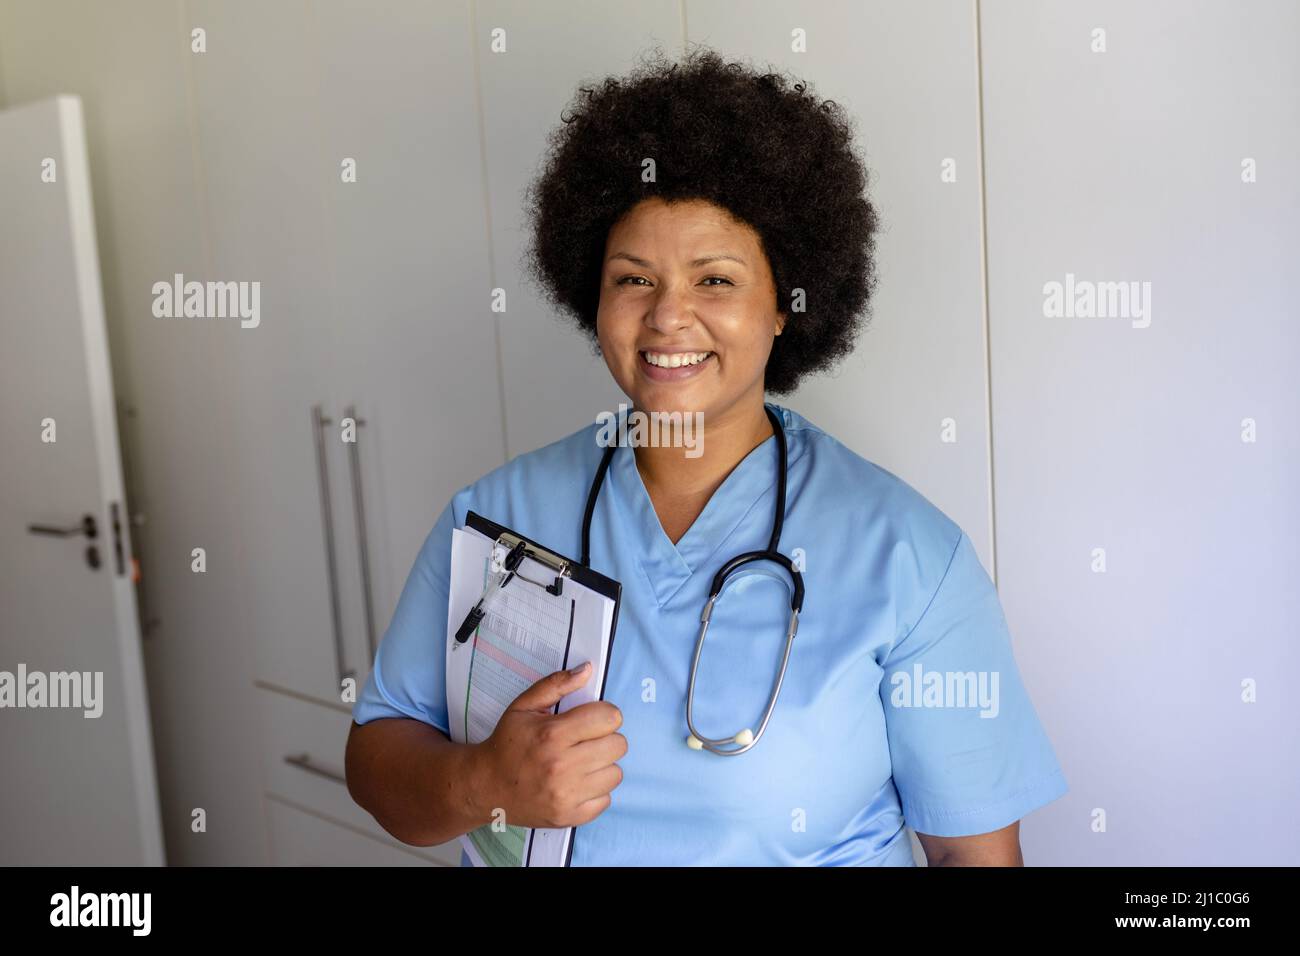 Portrait of smiling african american mid adult female nurse with stethoscope and clipboard Stock Photo